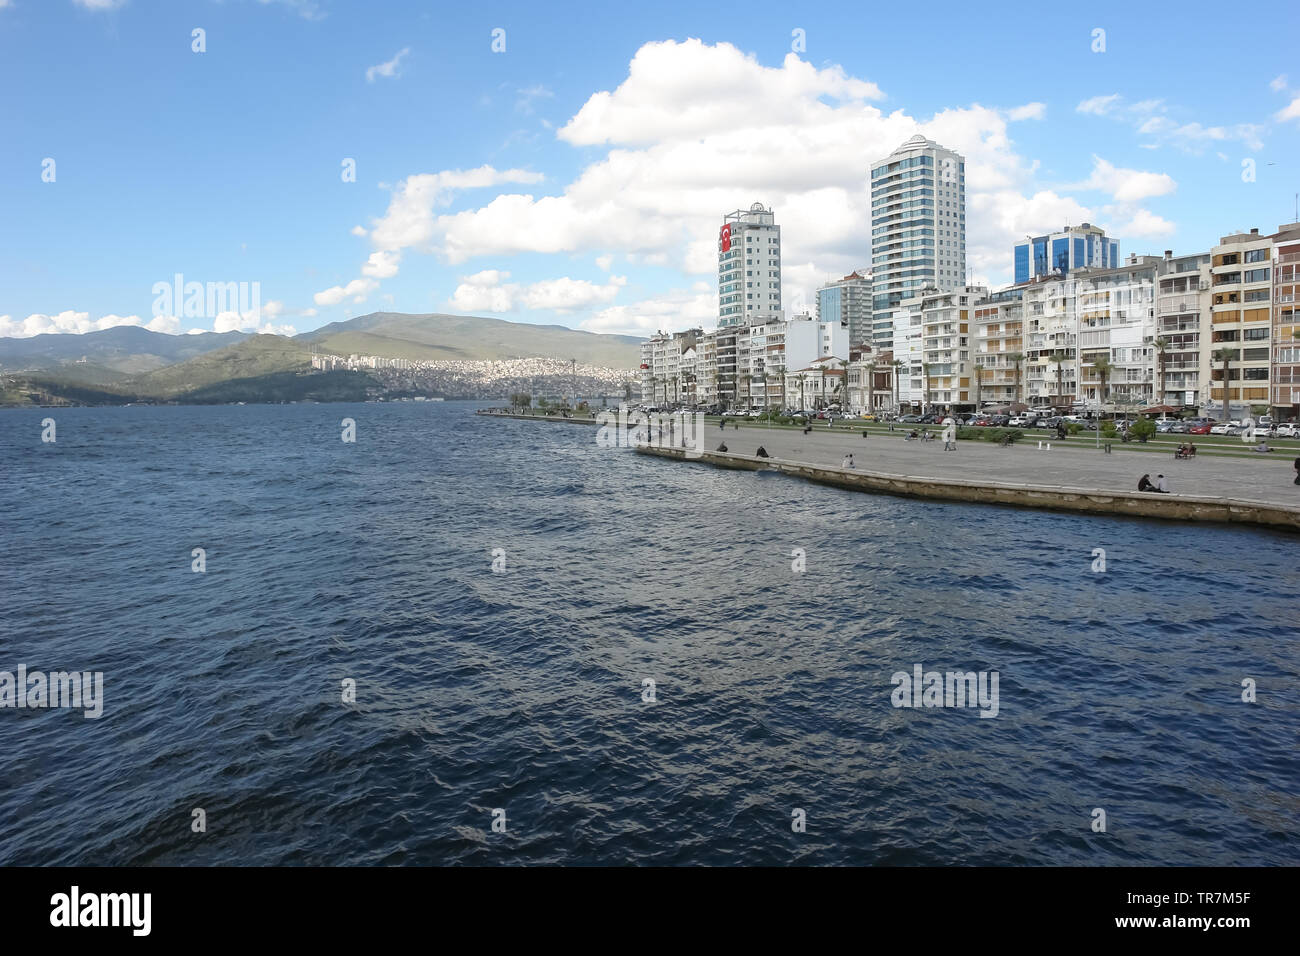 Picturesque panorama of the bay and the embankment of the city of Izmir, Turkey. Stock Photo